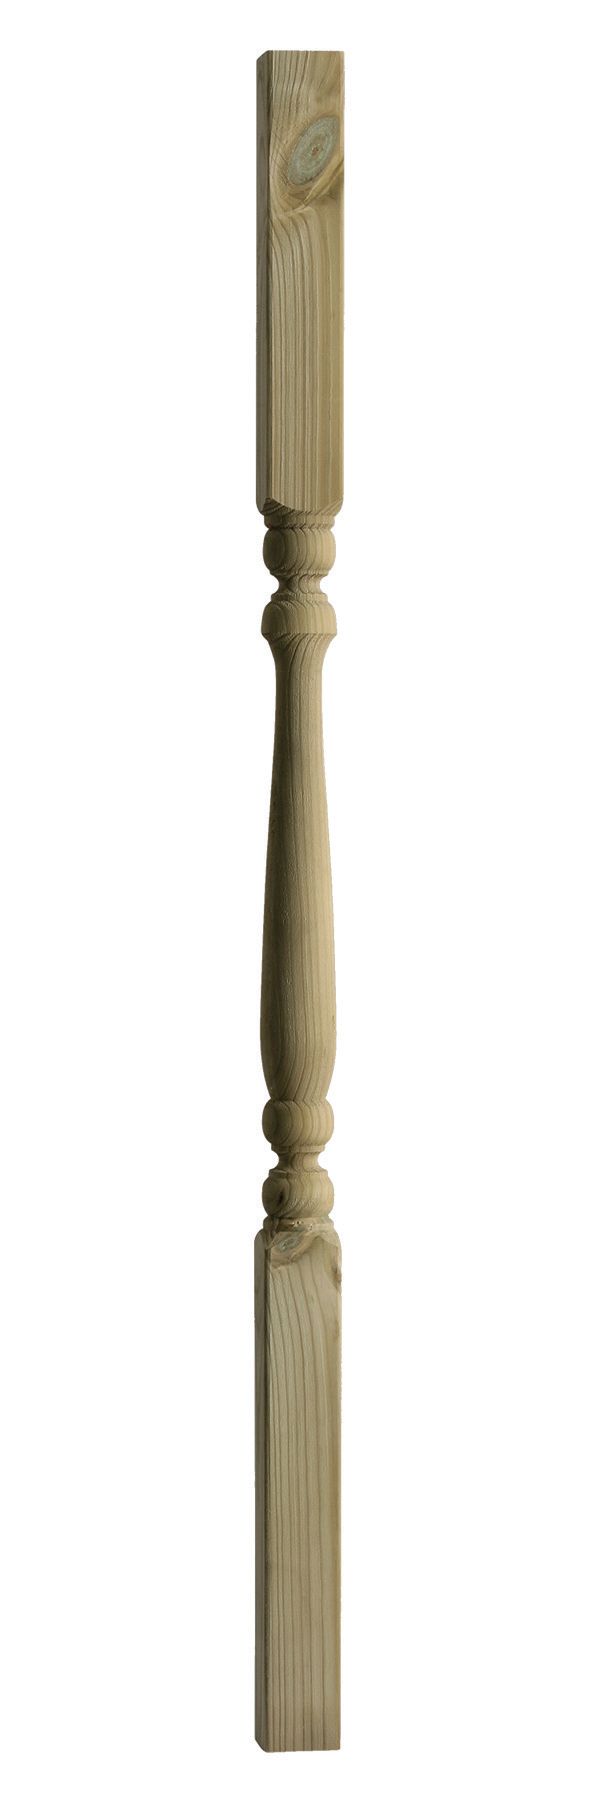 Colonial Deck Spindle - 41 x 41 x 895mm